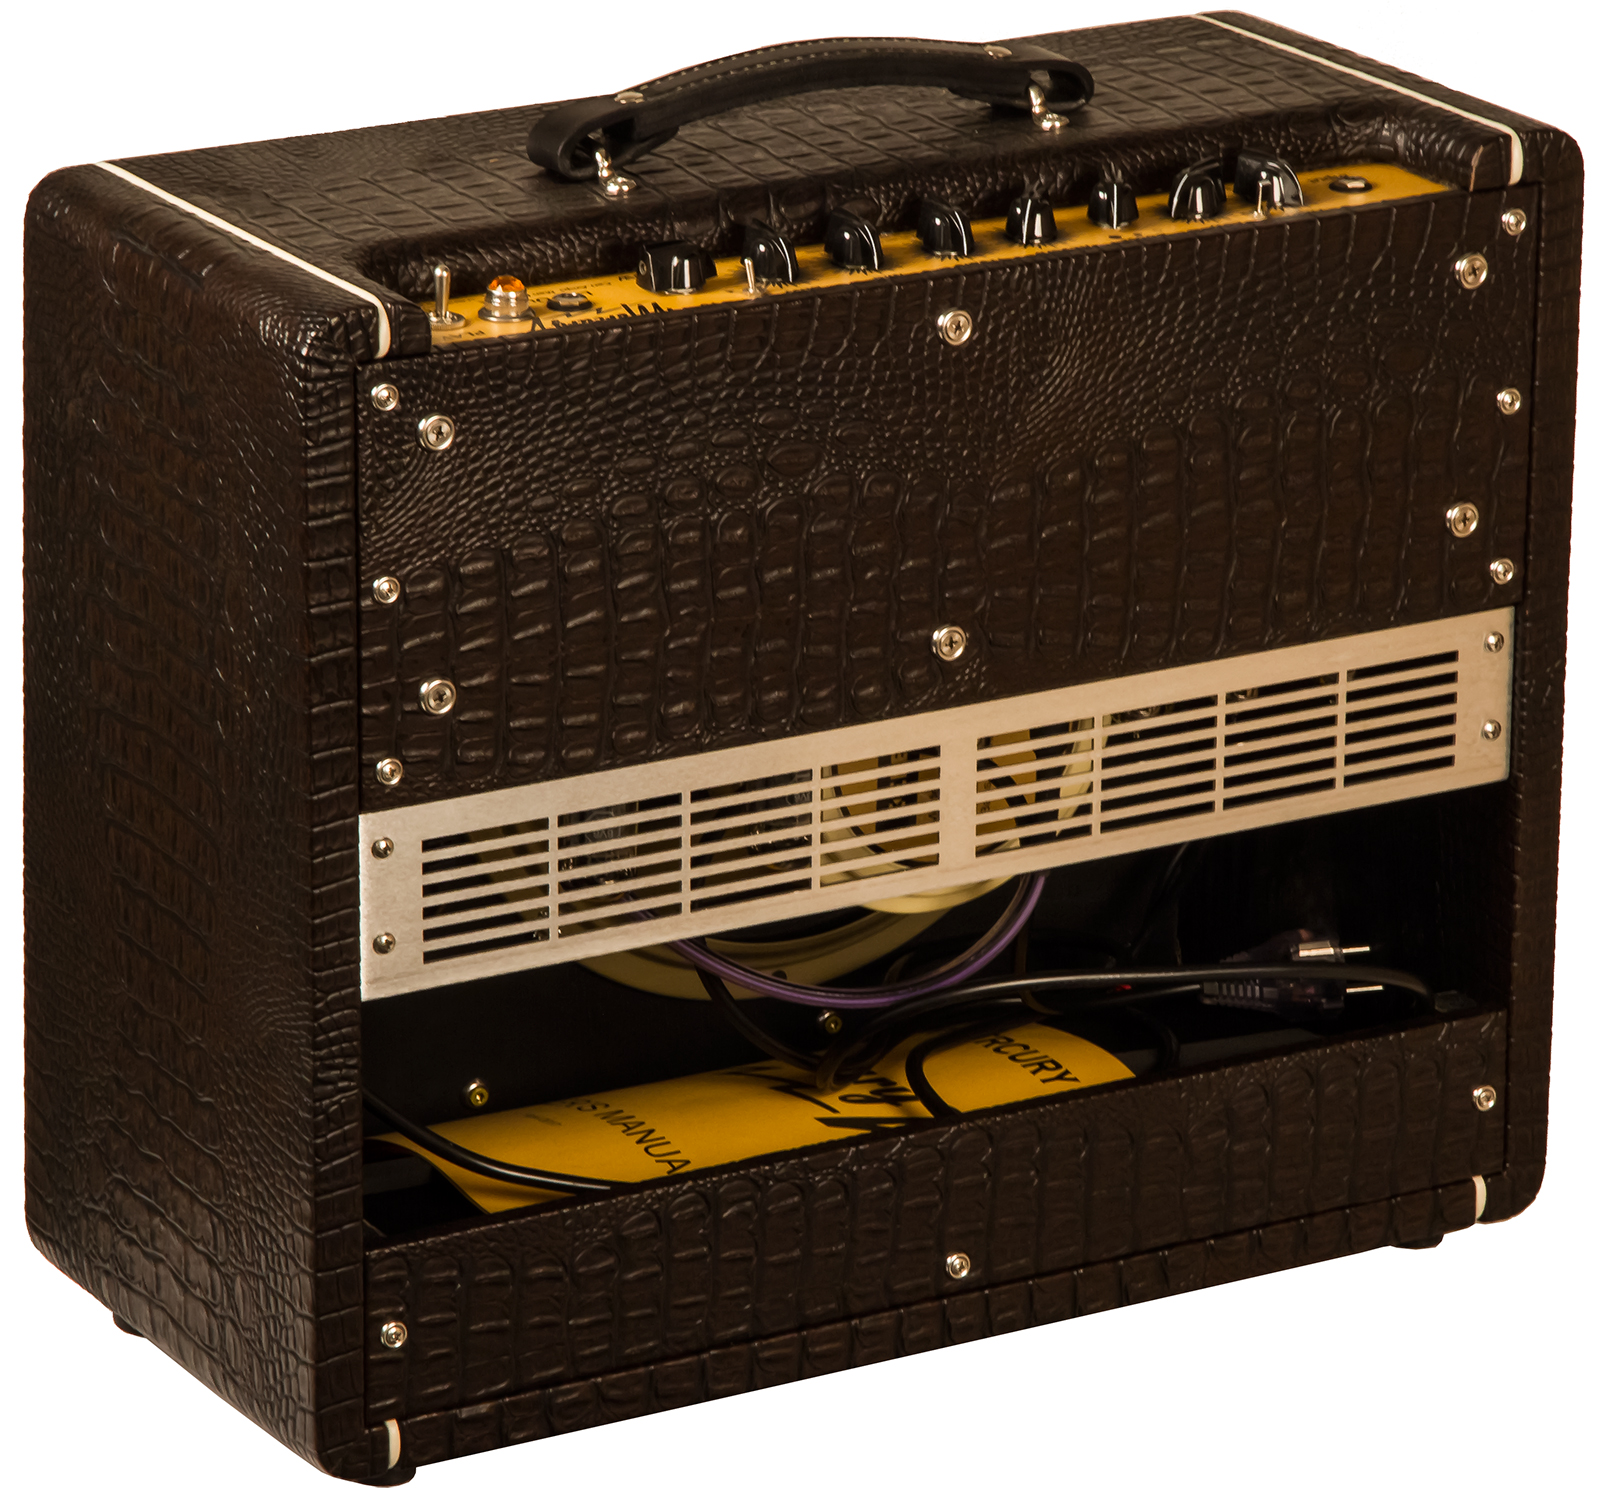 Carr Amplifiers Mercury V 1-12 Combo 16w 1x12 6v6 Brown Gator - Electric guitar combo amp - Variation 1